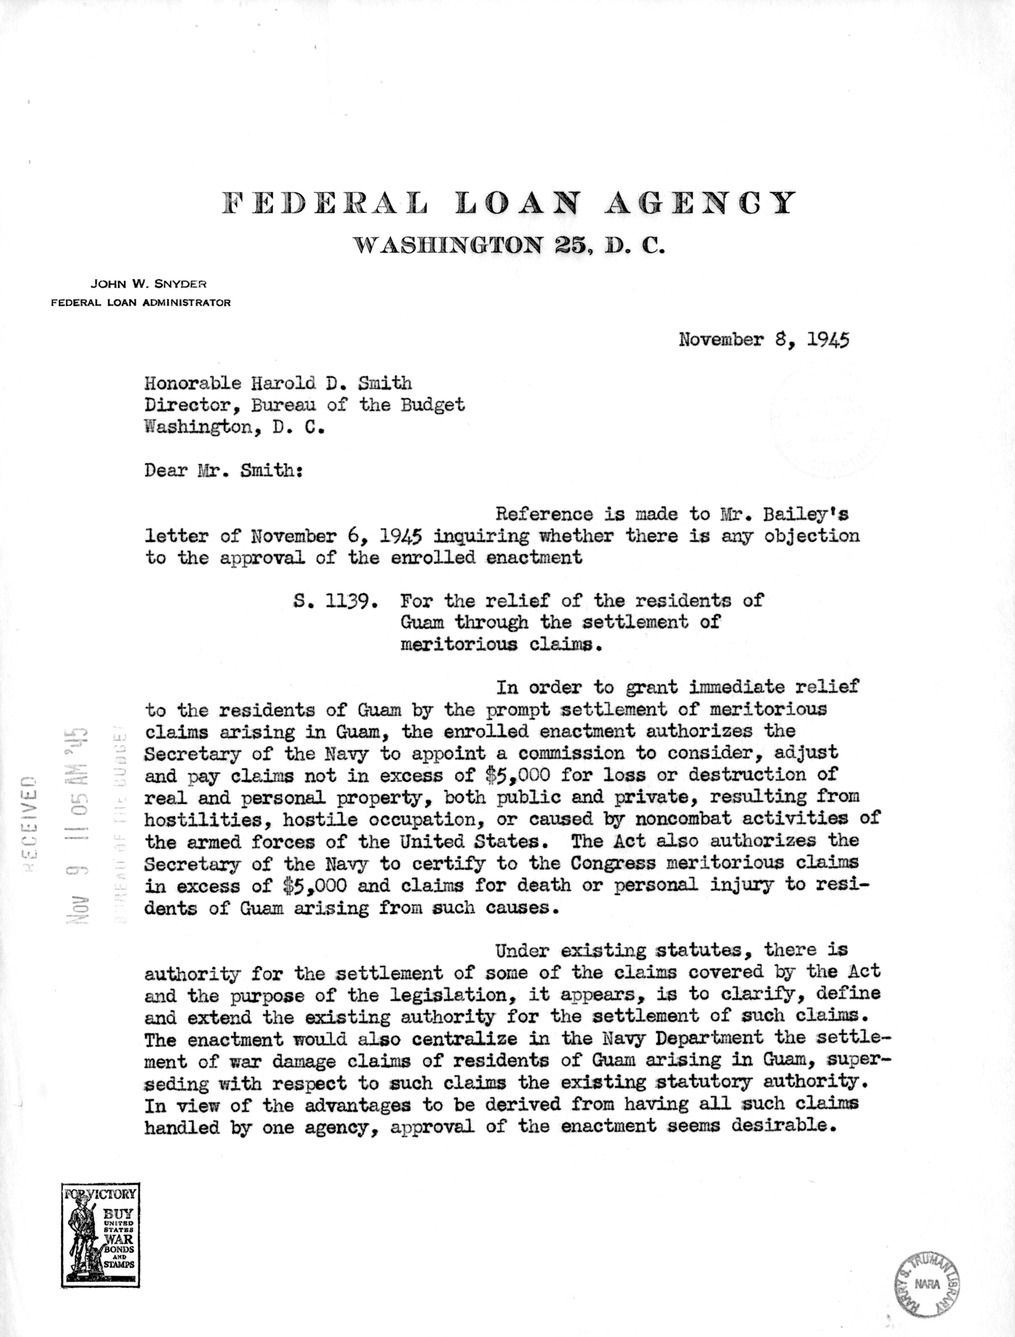 Memorandum from Harold D. Smith to M. C. Latta, S. 1139, For the Relief of the Residents of Guam Through the Settlement of Meritorious Claims, with Attachments